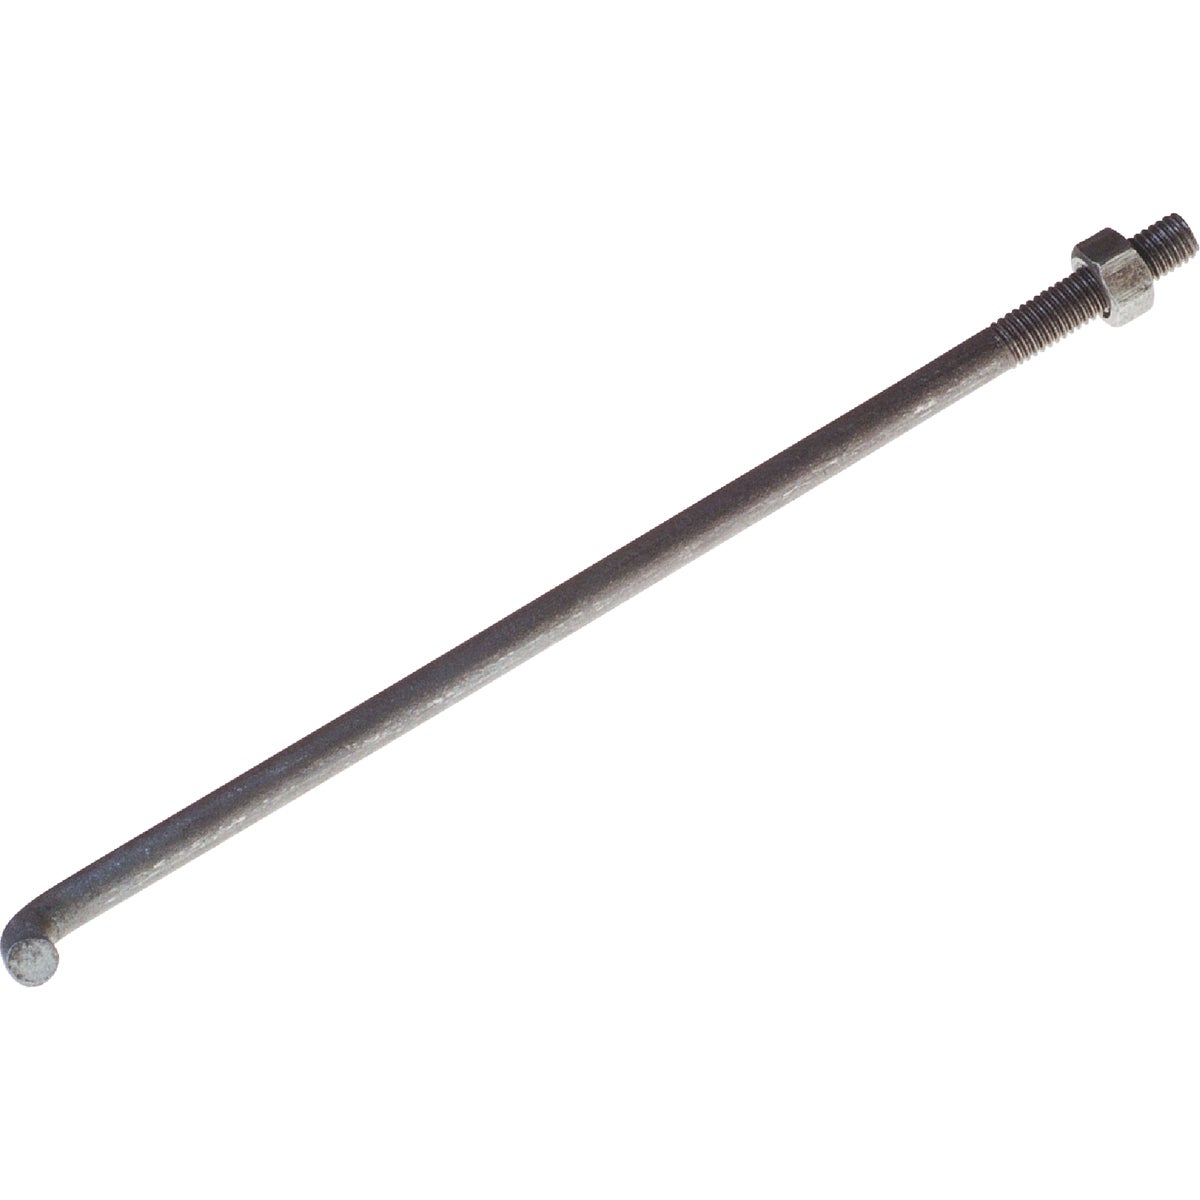 Grip-Rite 1/2 In. x 8 In. Galvanized Foundation Anchor Bolt with Nut & Washer (50 Ct.)